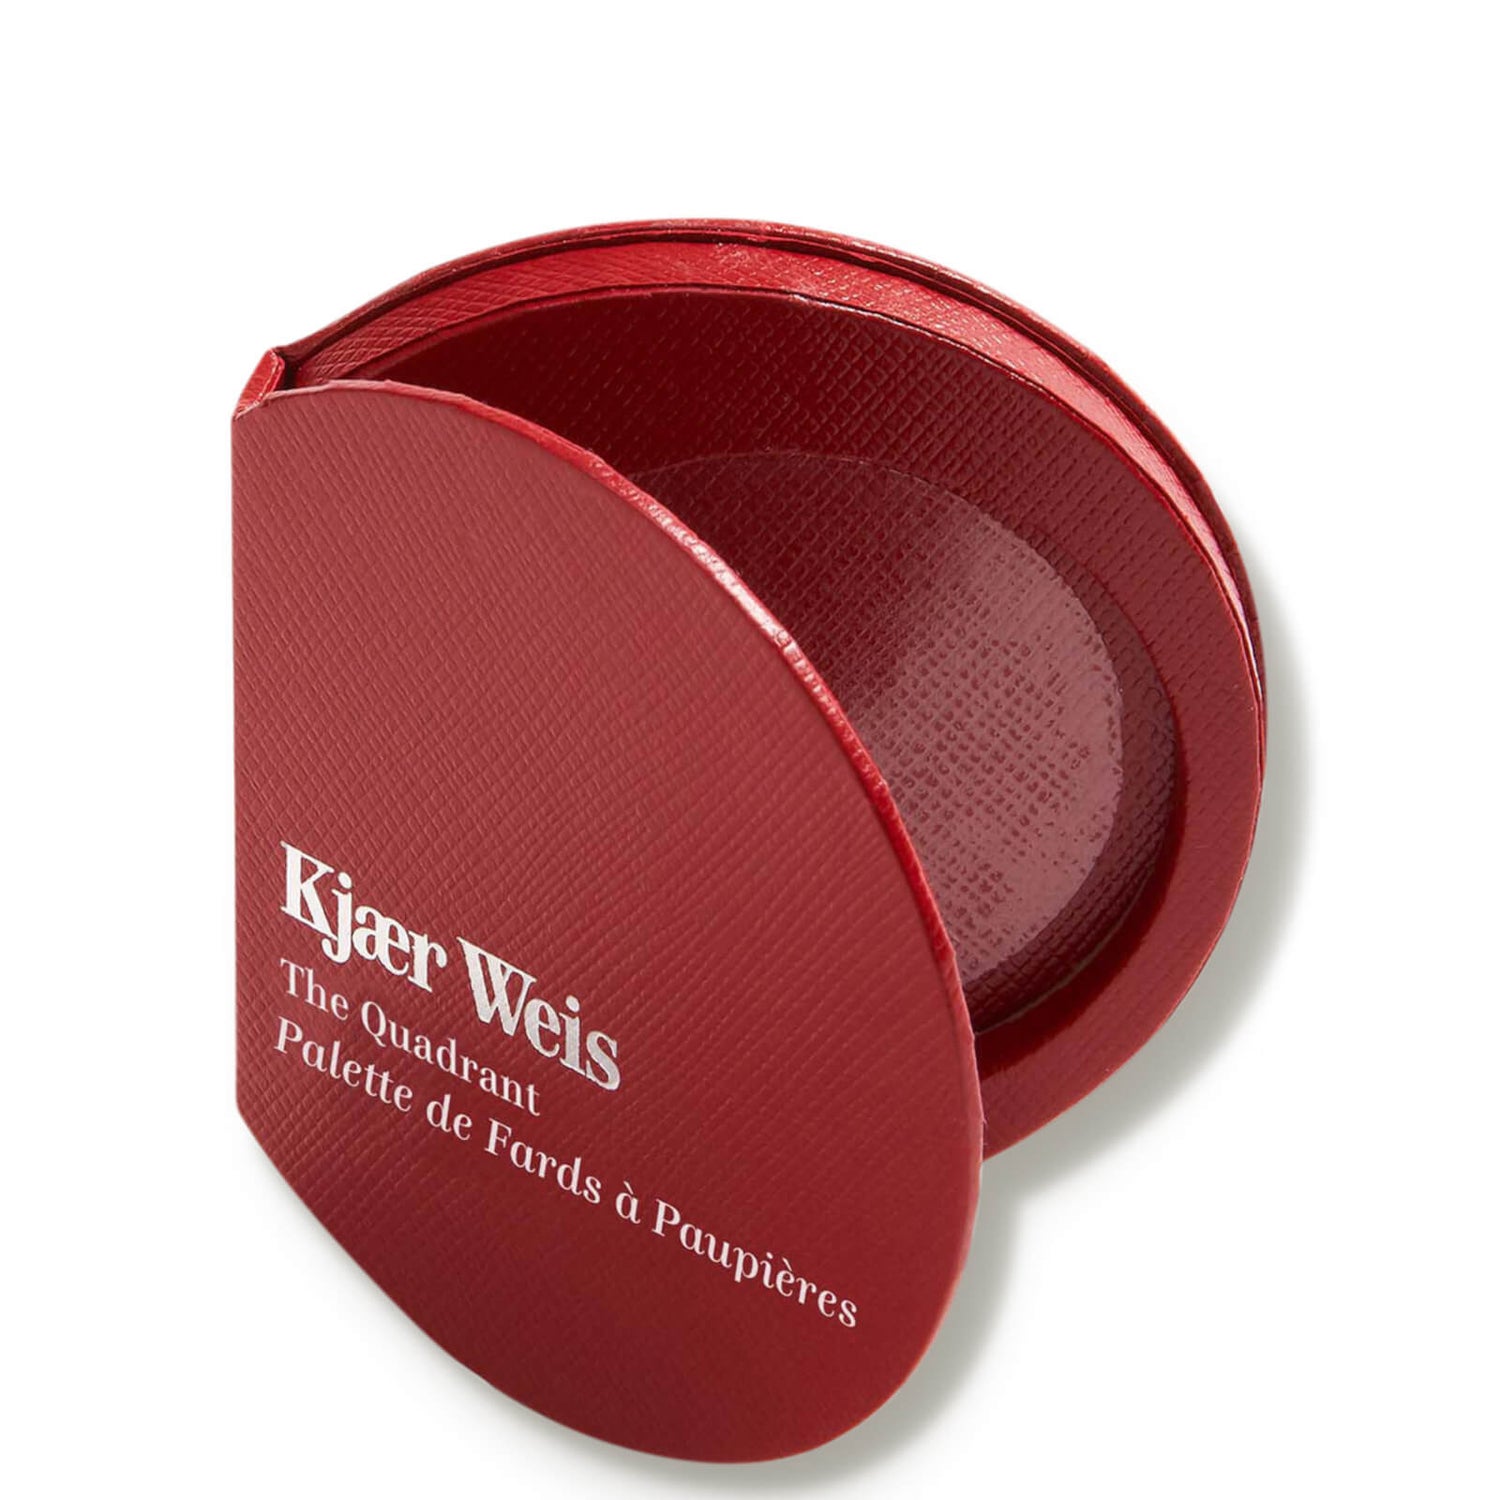 Kjaer Weis Red Edition Compact - The Quadrant 1 piece